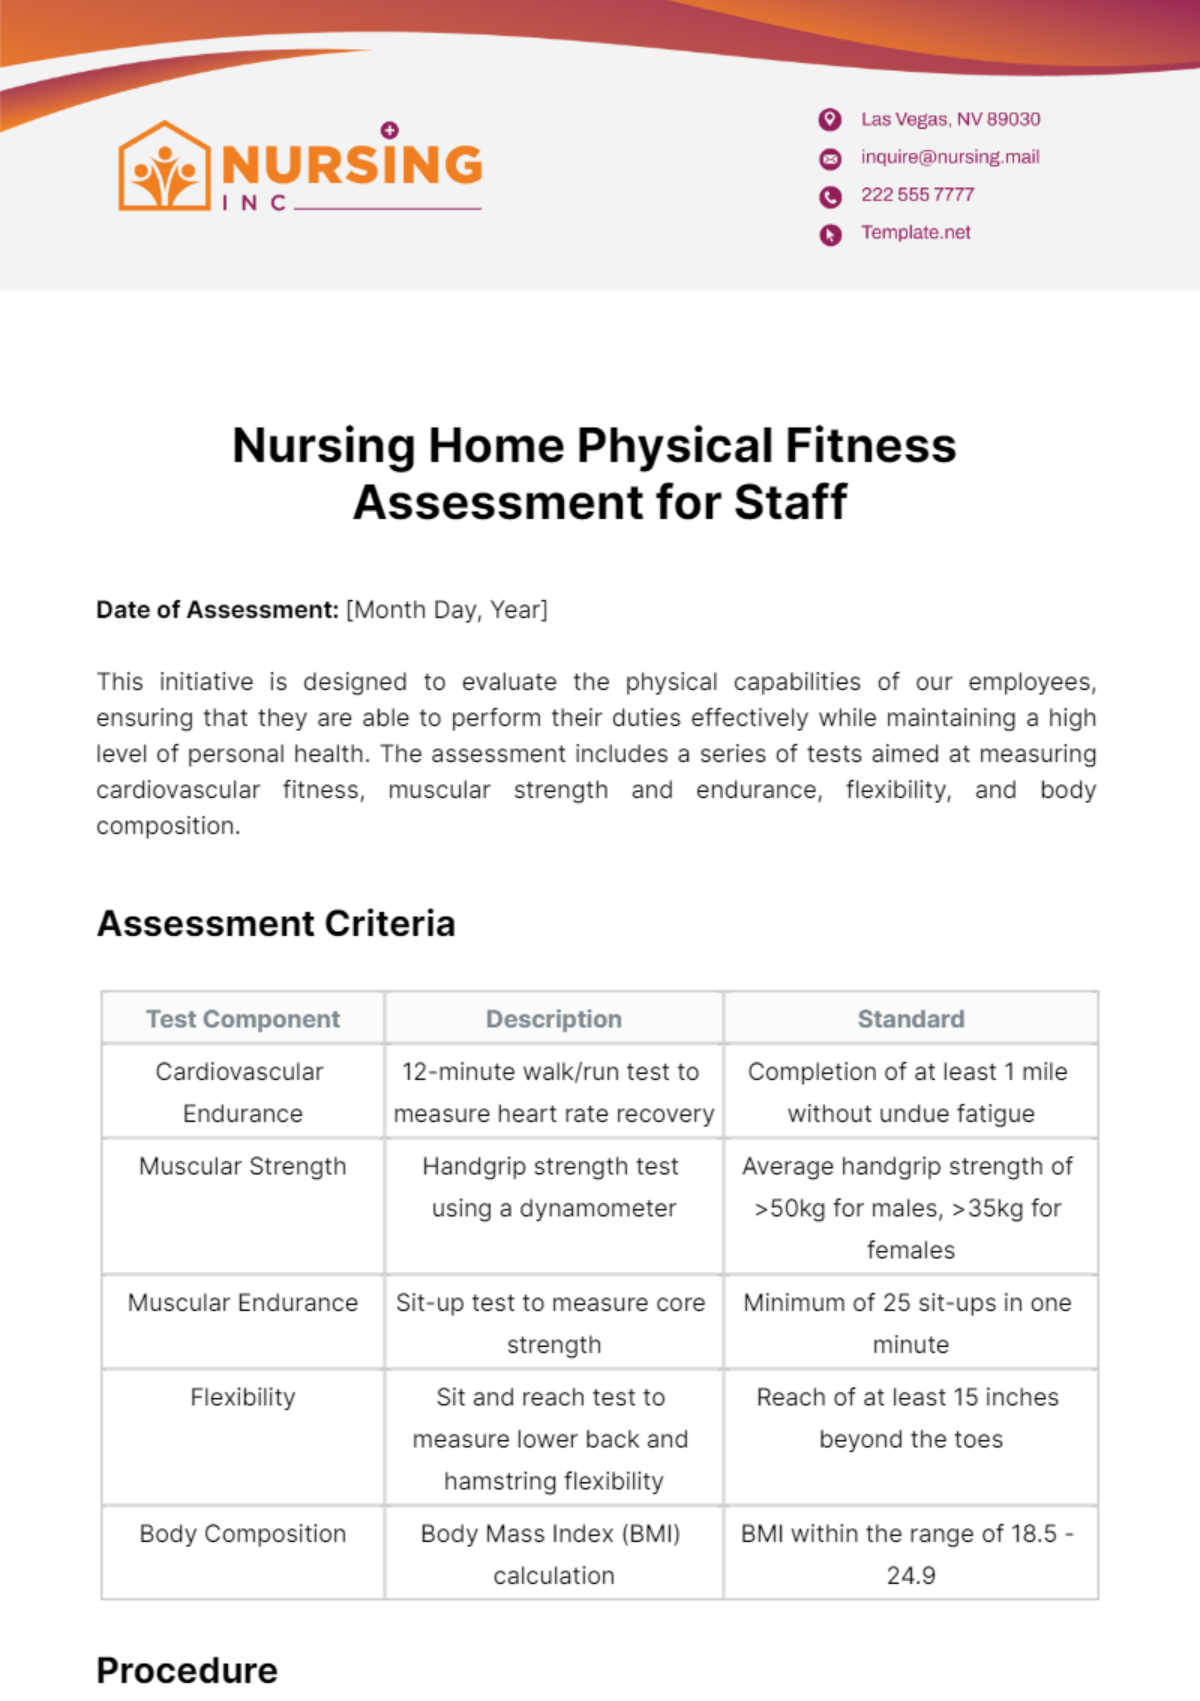 Nursing Home Physical Fitness Assessment for Staff Template